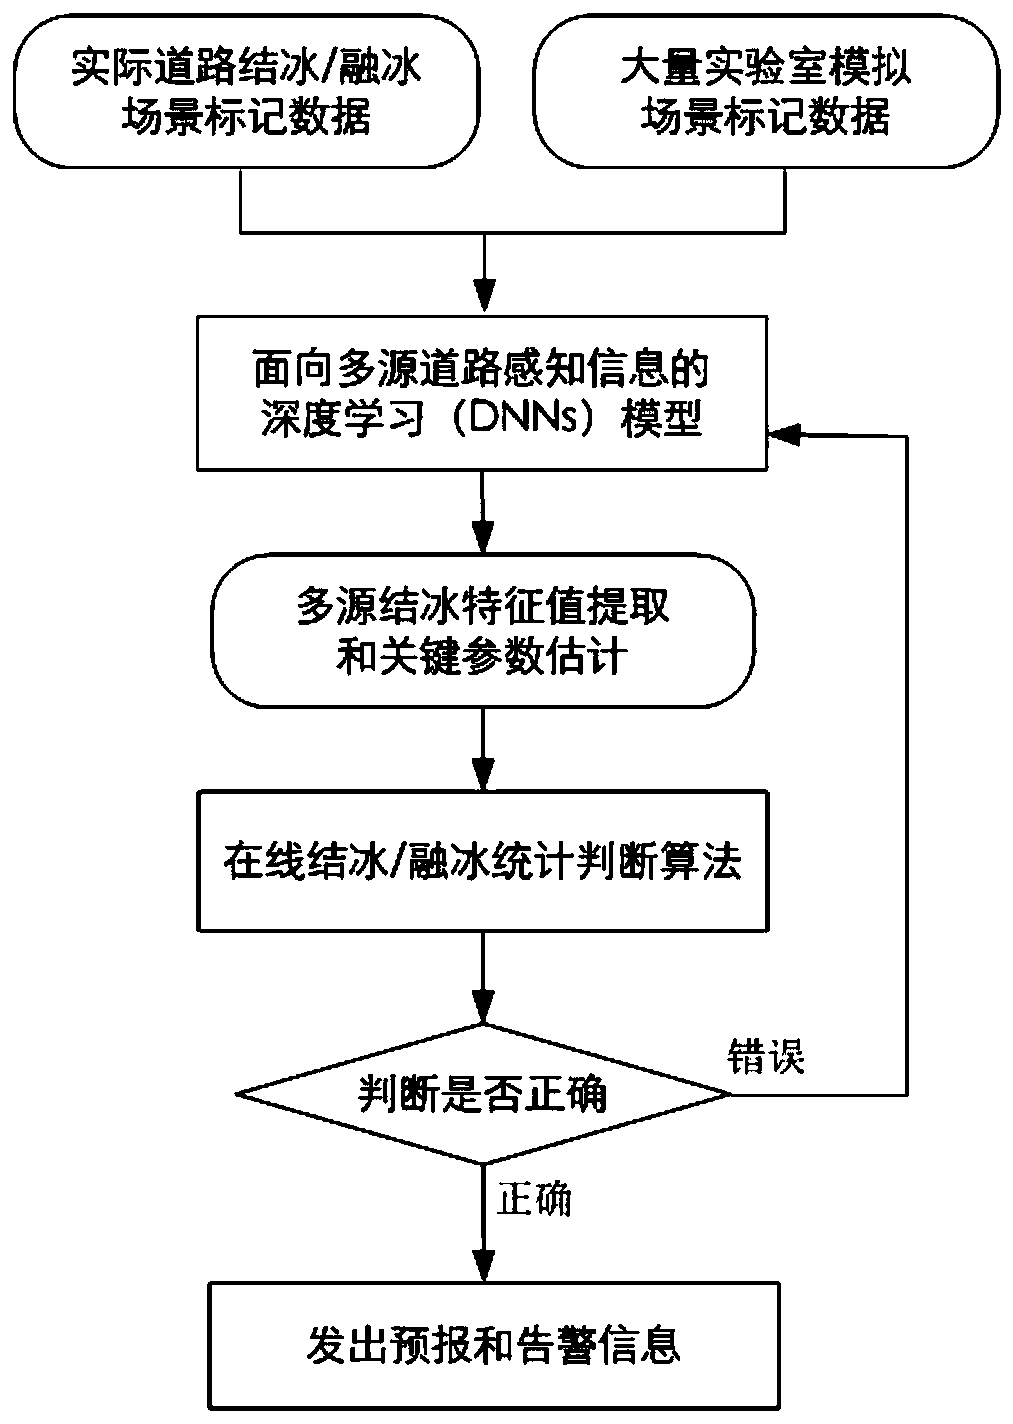 Road icing, snow melting and deicing online monitoring method and system